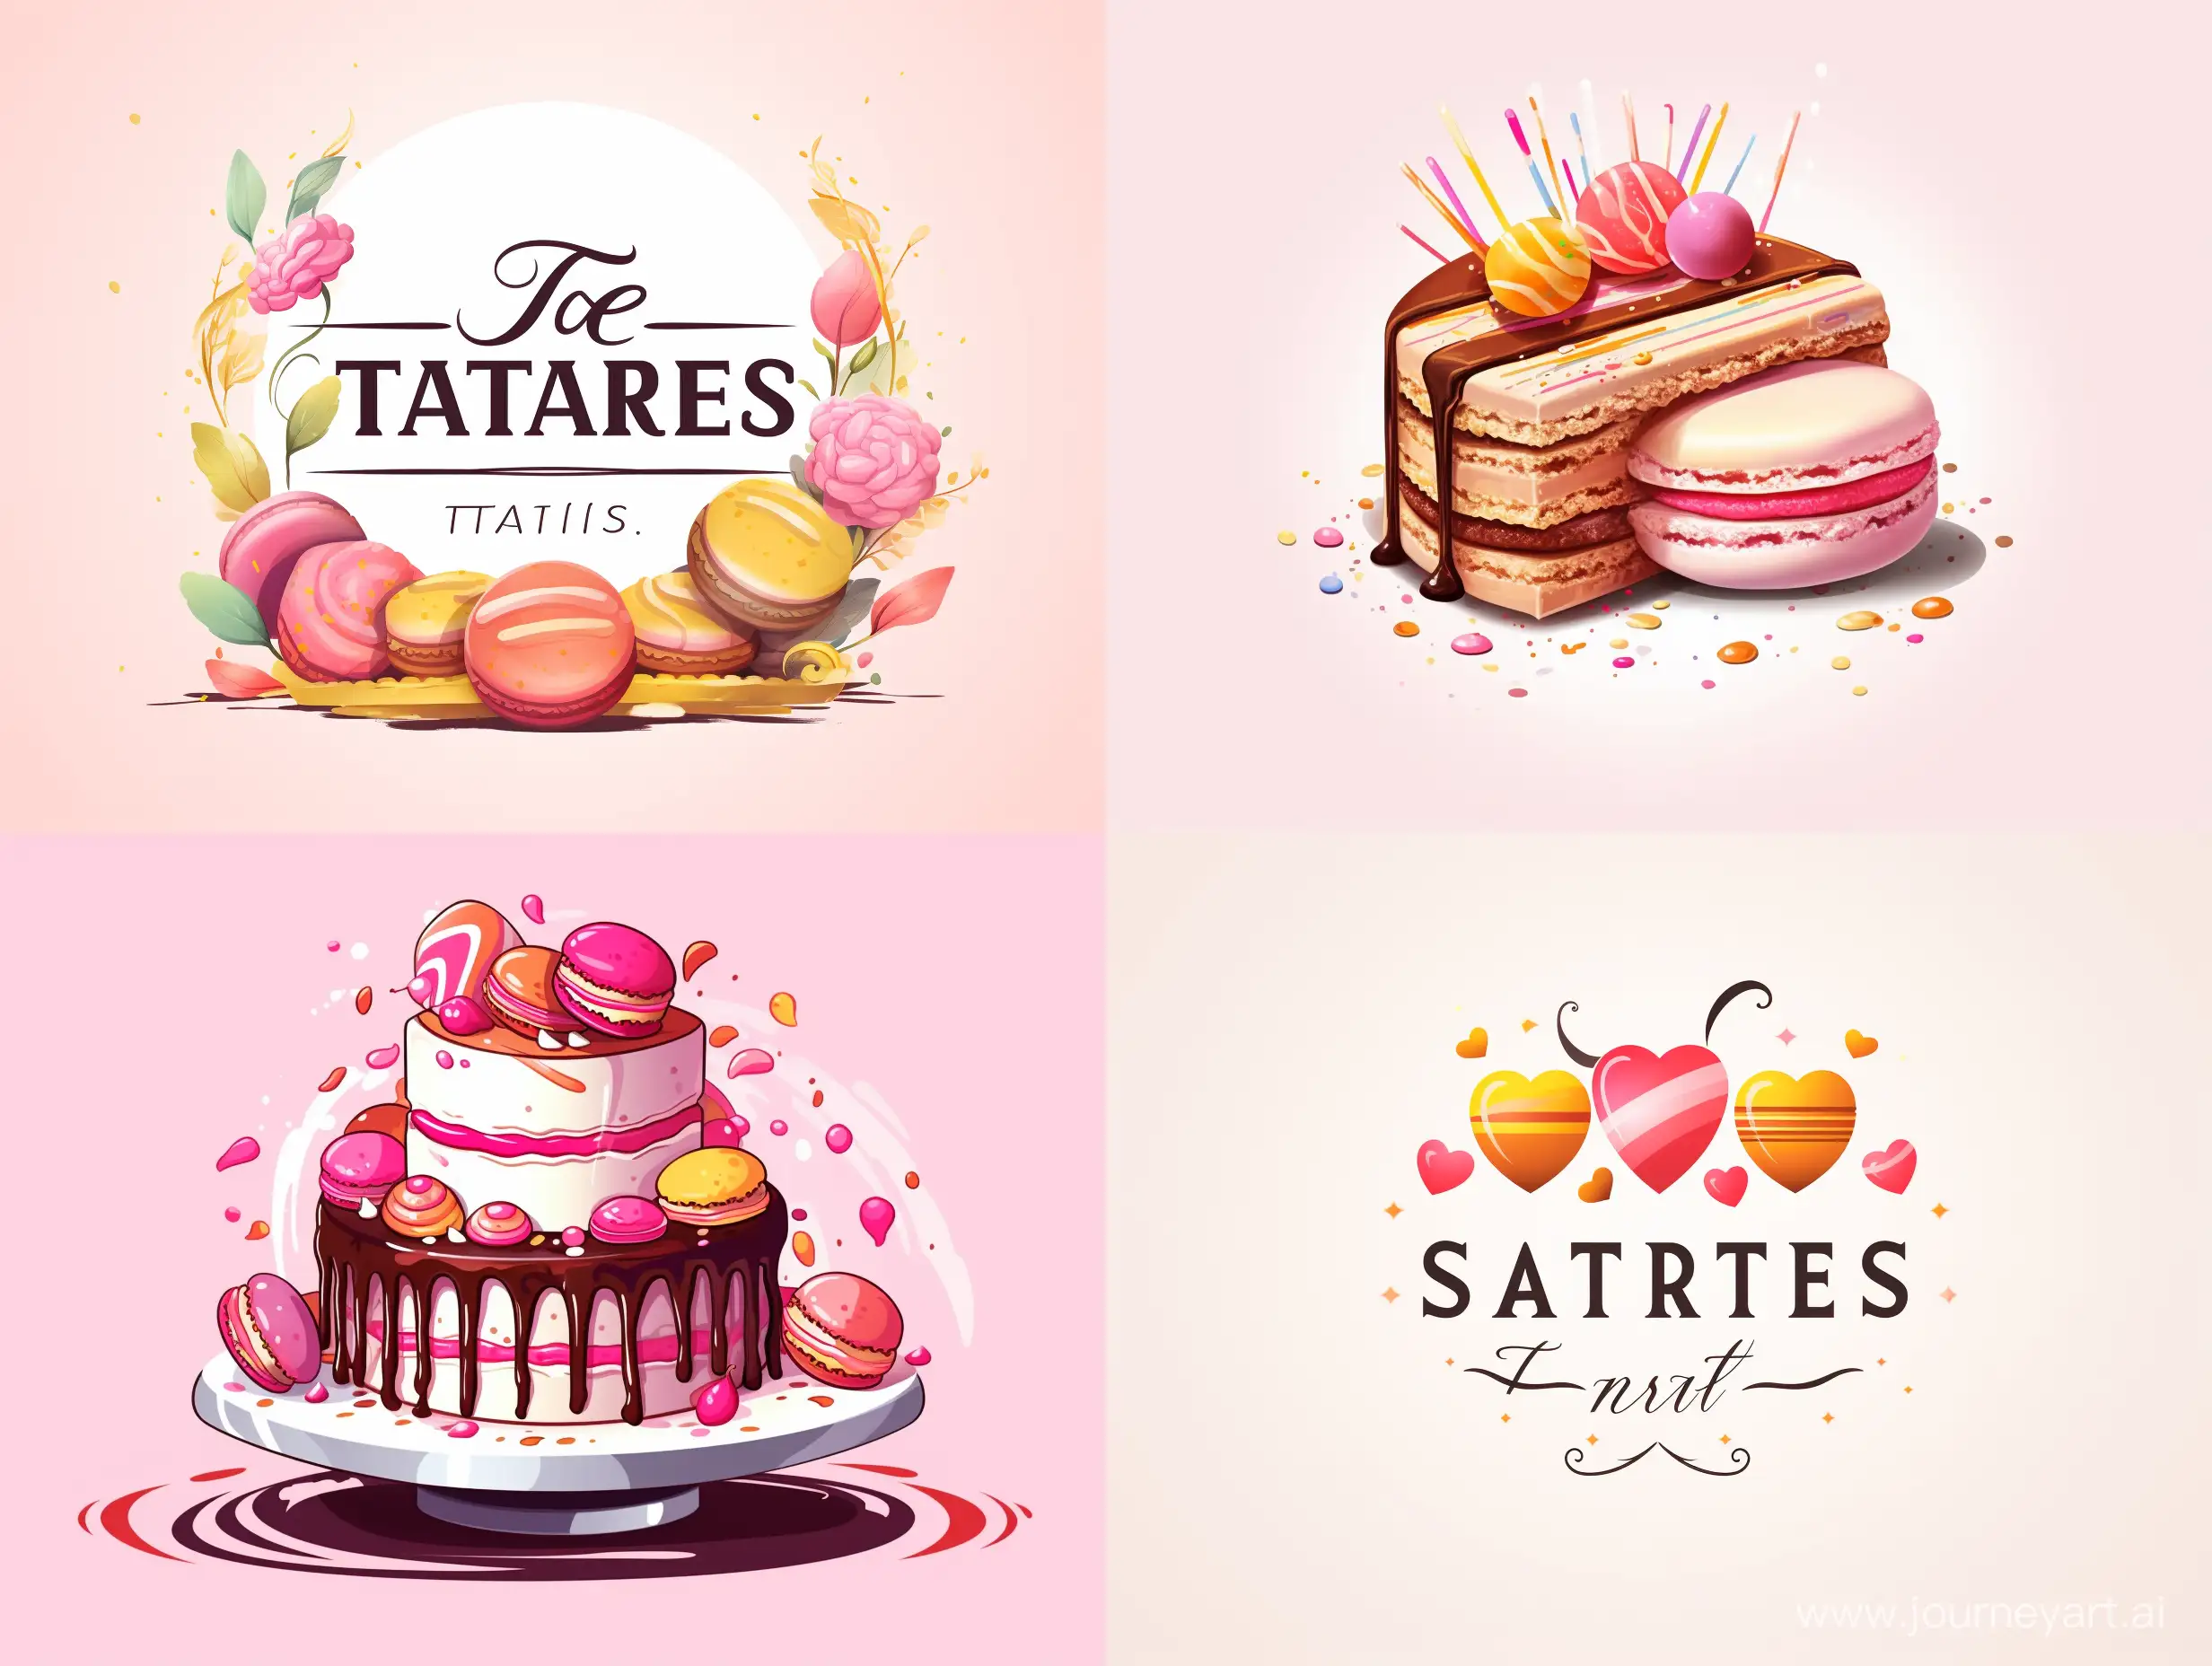 Elegant-Sweet-Tarts-Patisserie-Logo-with-a-43-Aspect-Ratio-No-93808